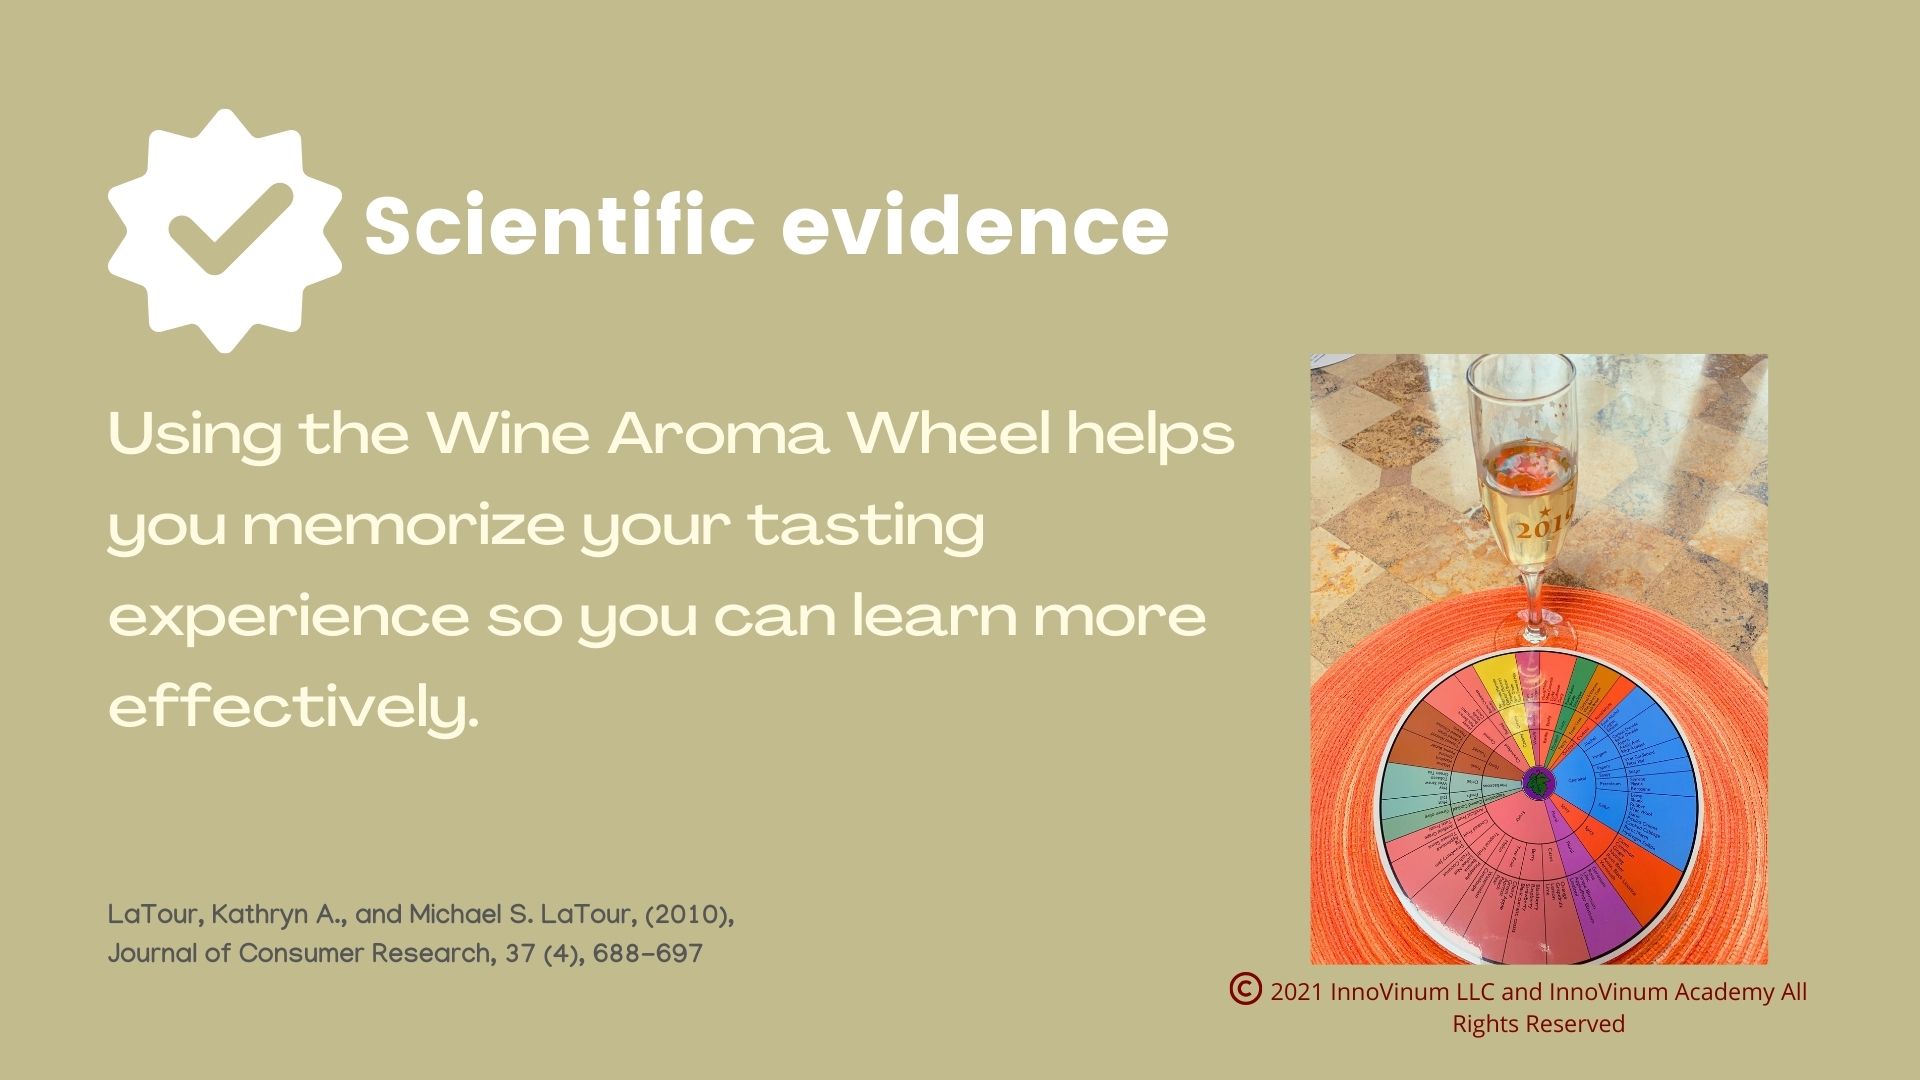 An image quoting a research paper by Latour et al. who demonstrated how using the wine aroma wheel helped novice tasters learned an analytical method to taste wine.